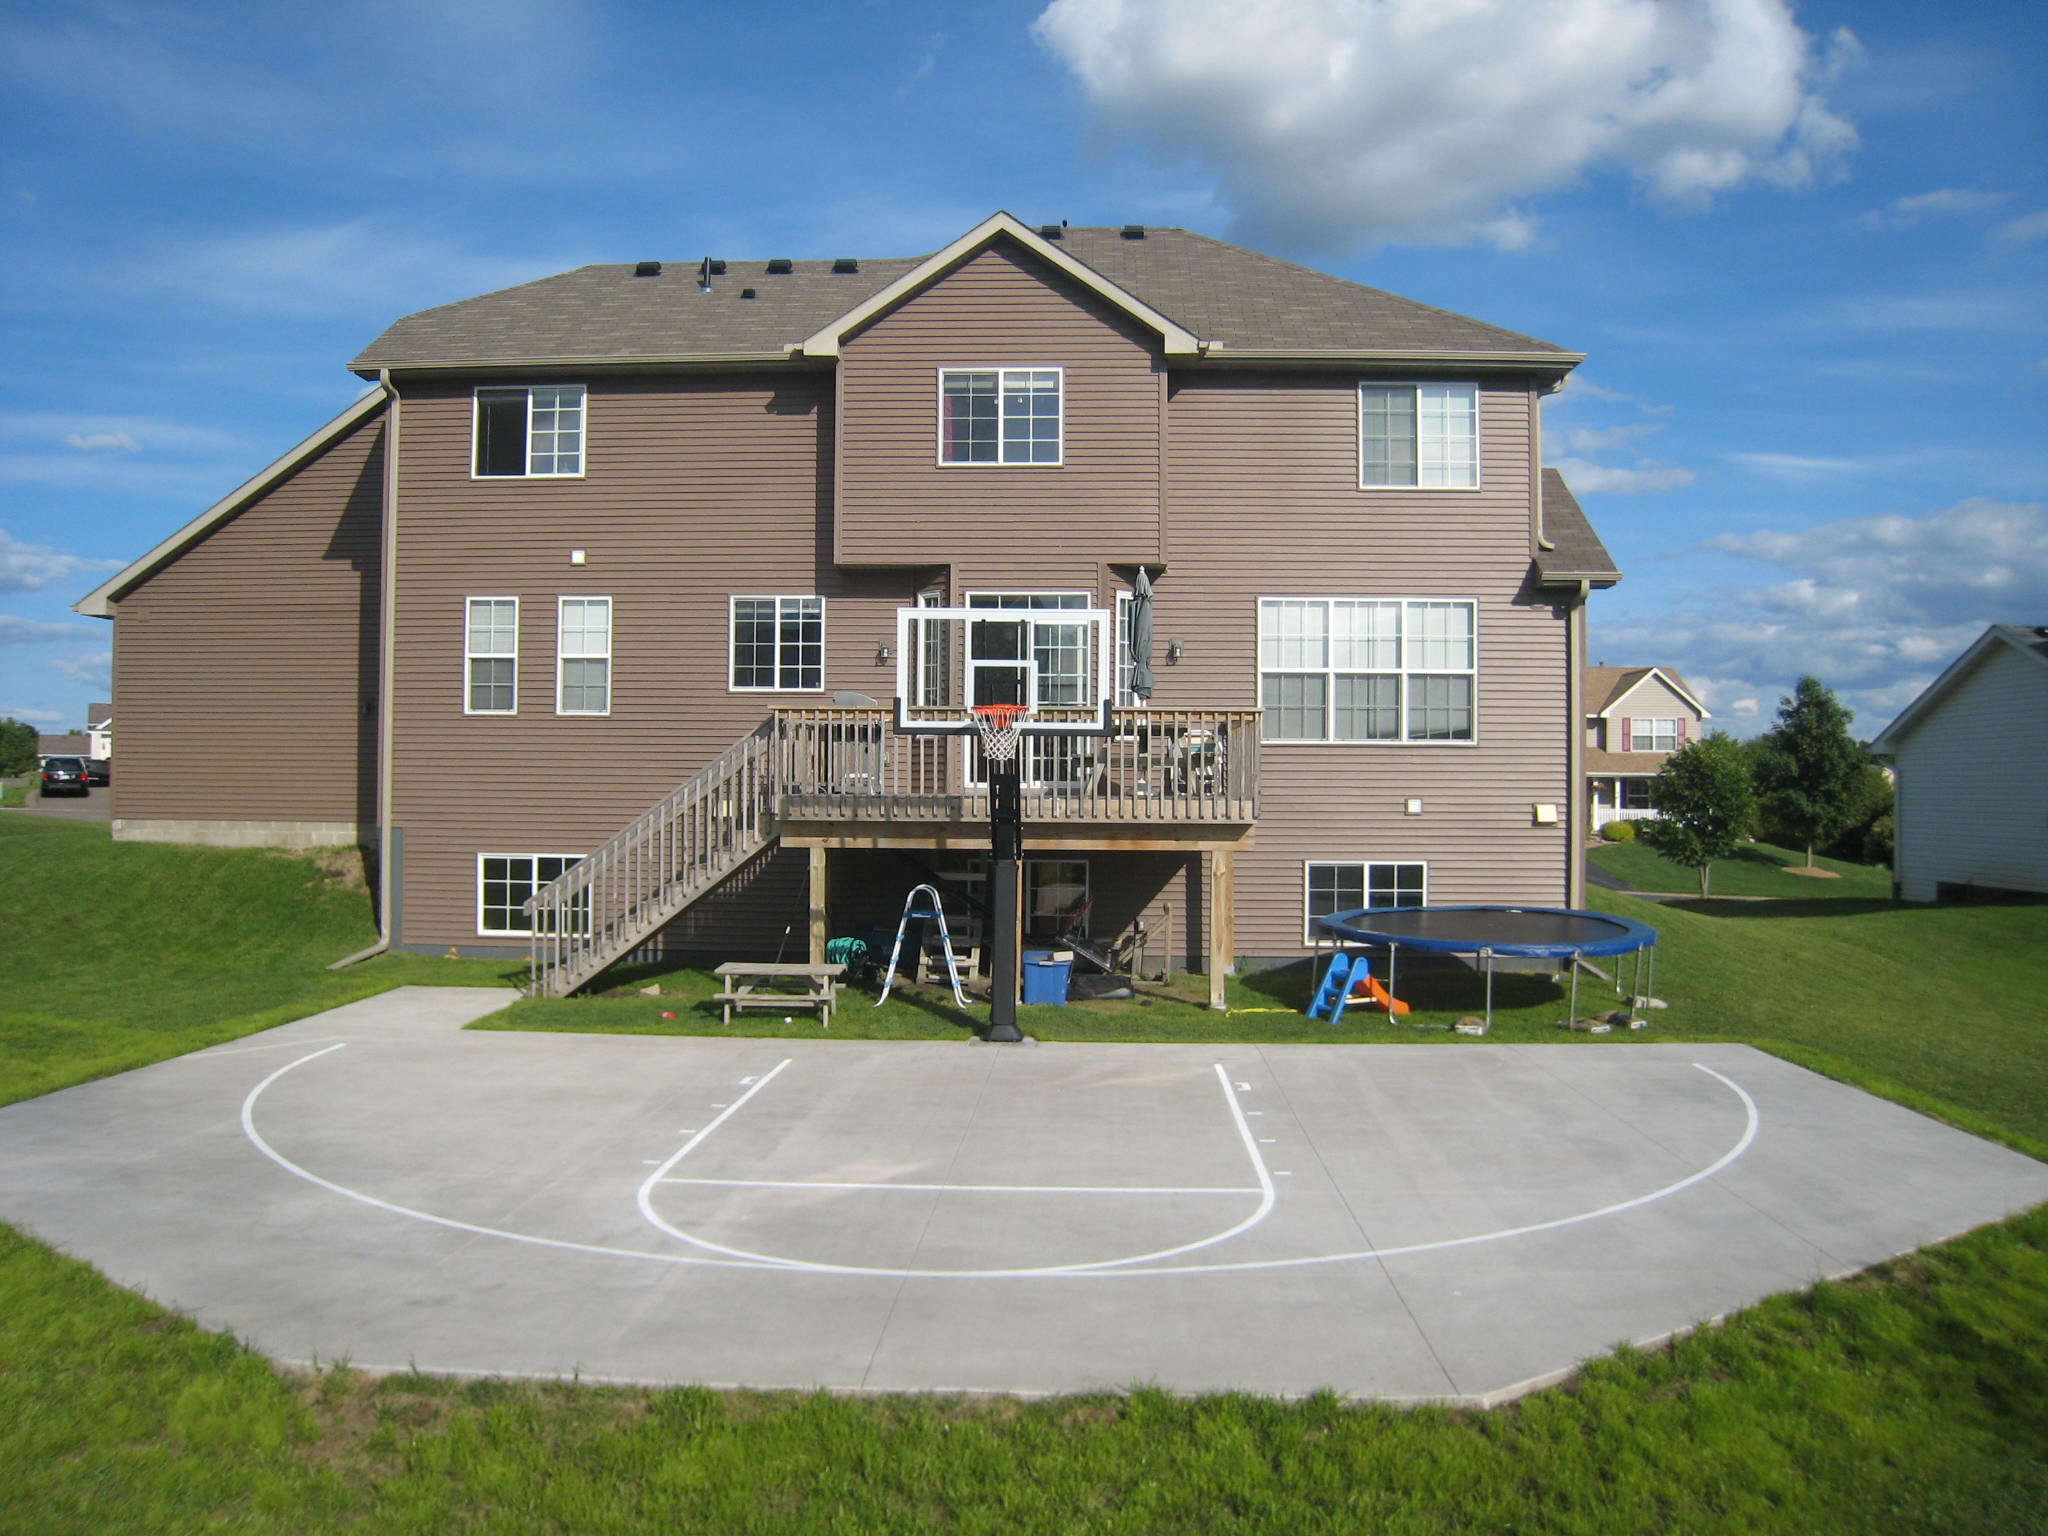 Backyard Basketball Courts Cost
 How Much Does It Cost For A Backyard Basketball Court